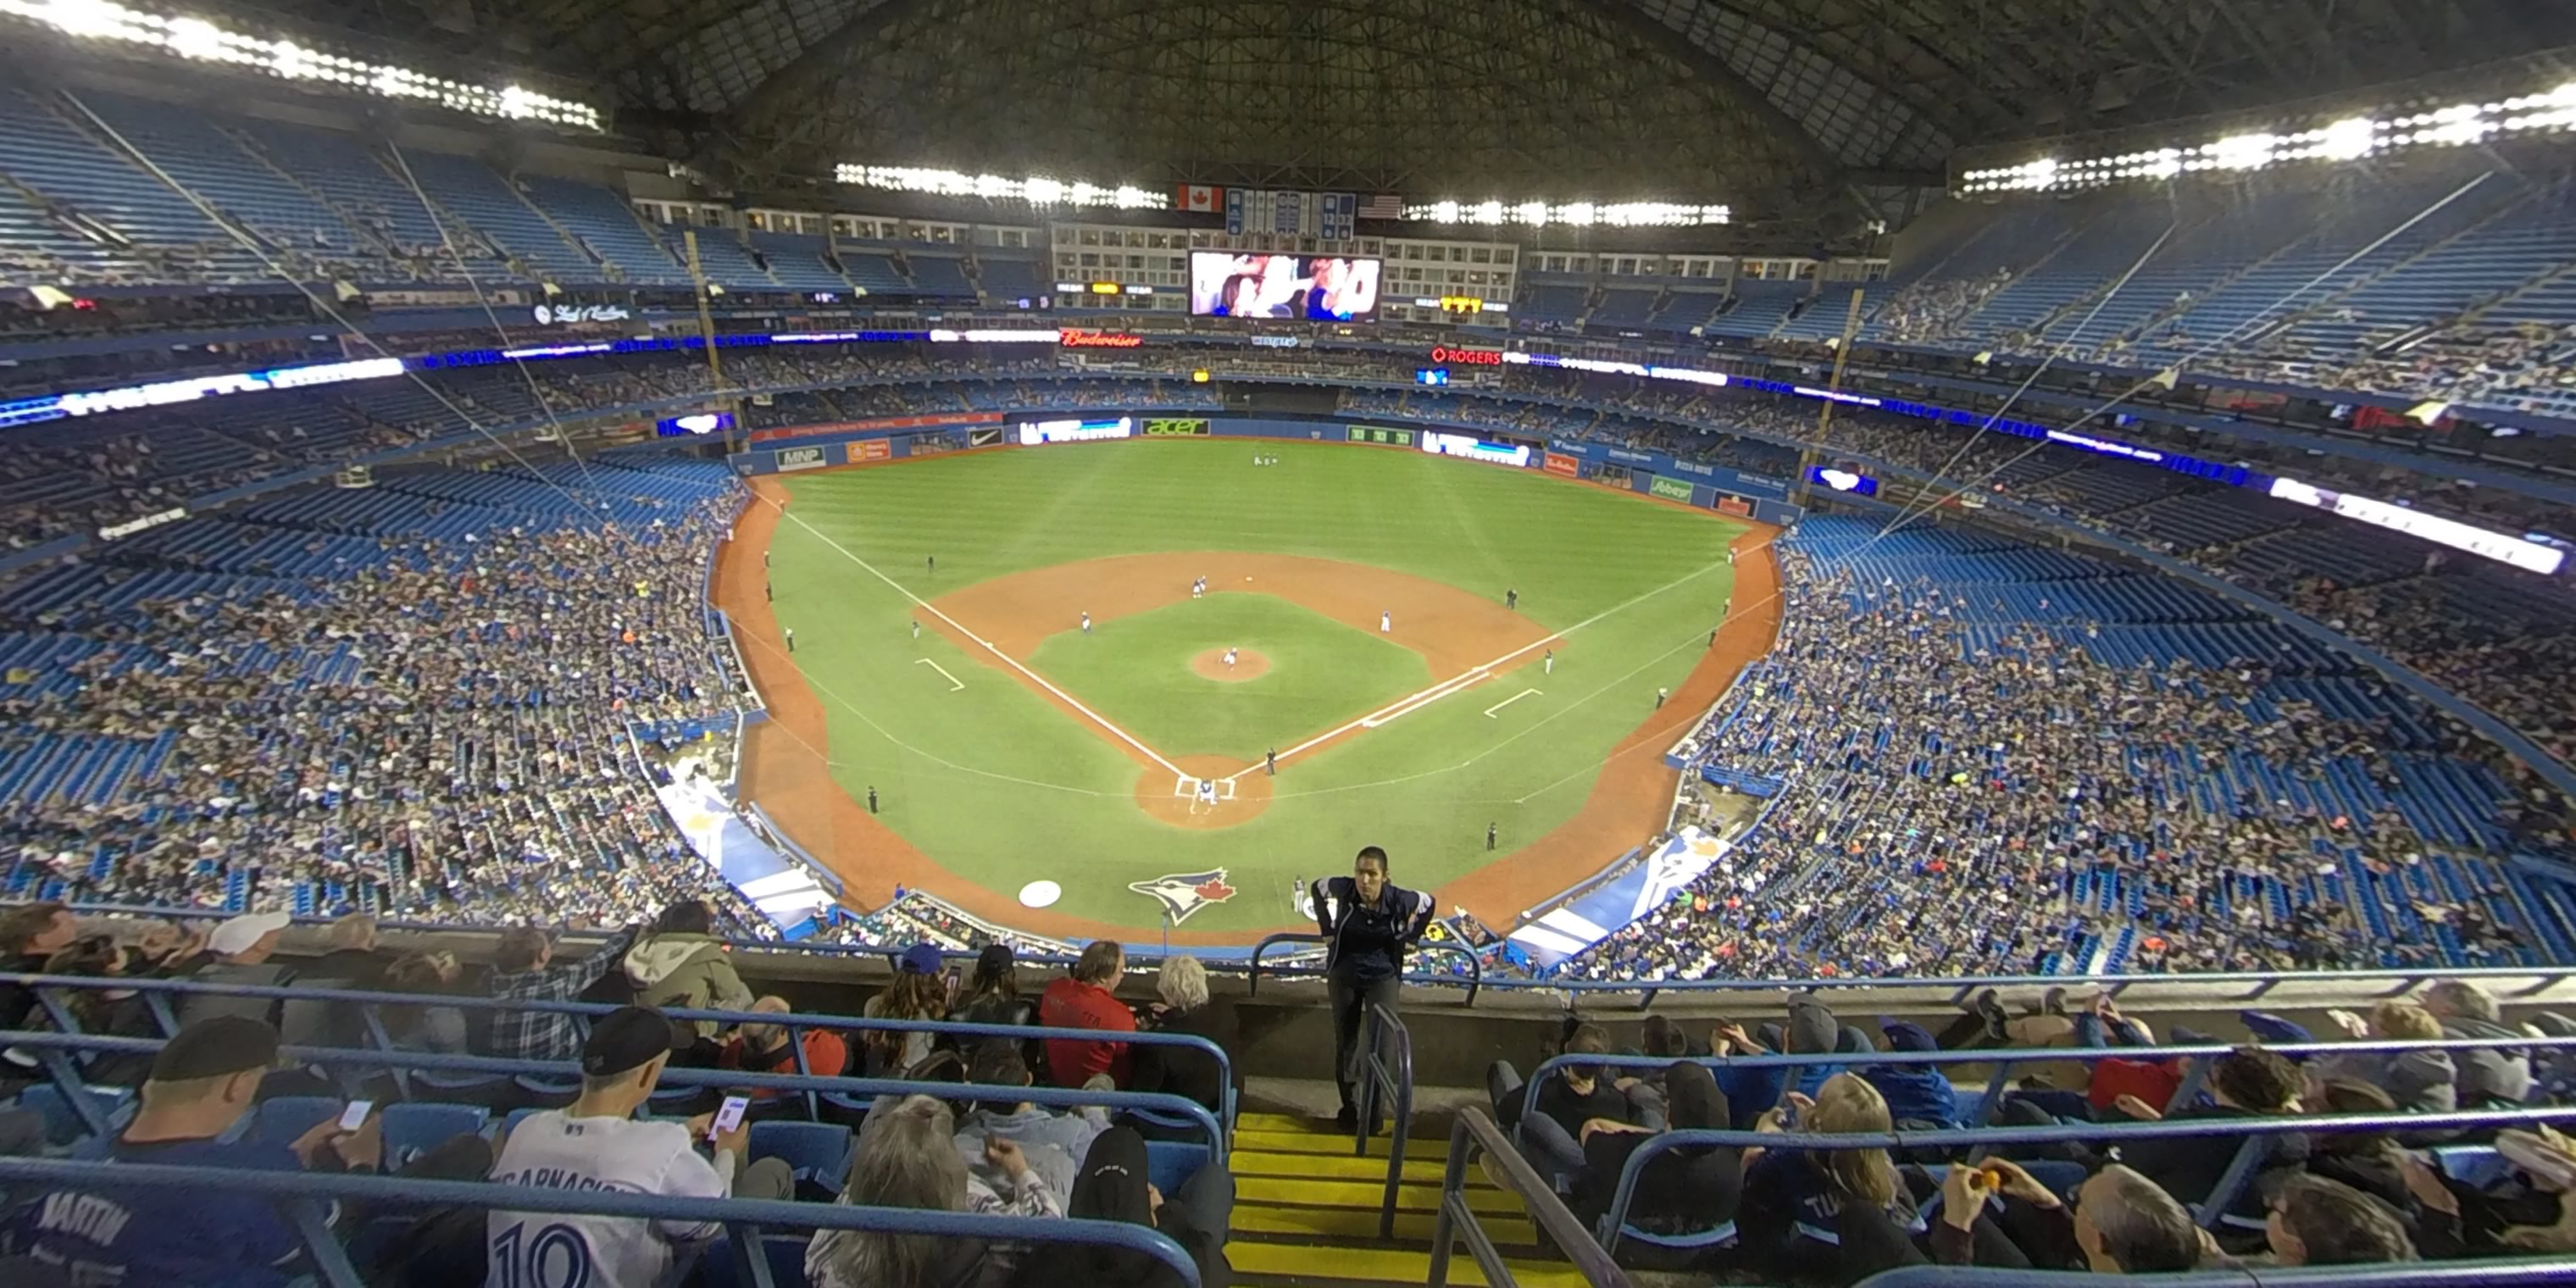 Section 524 at Rogers Centre 